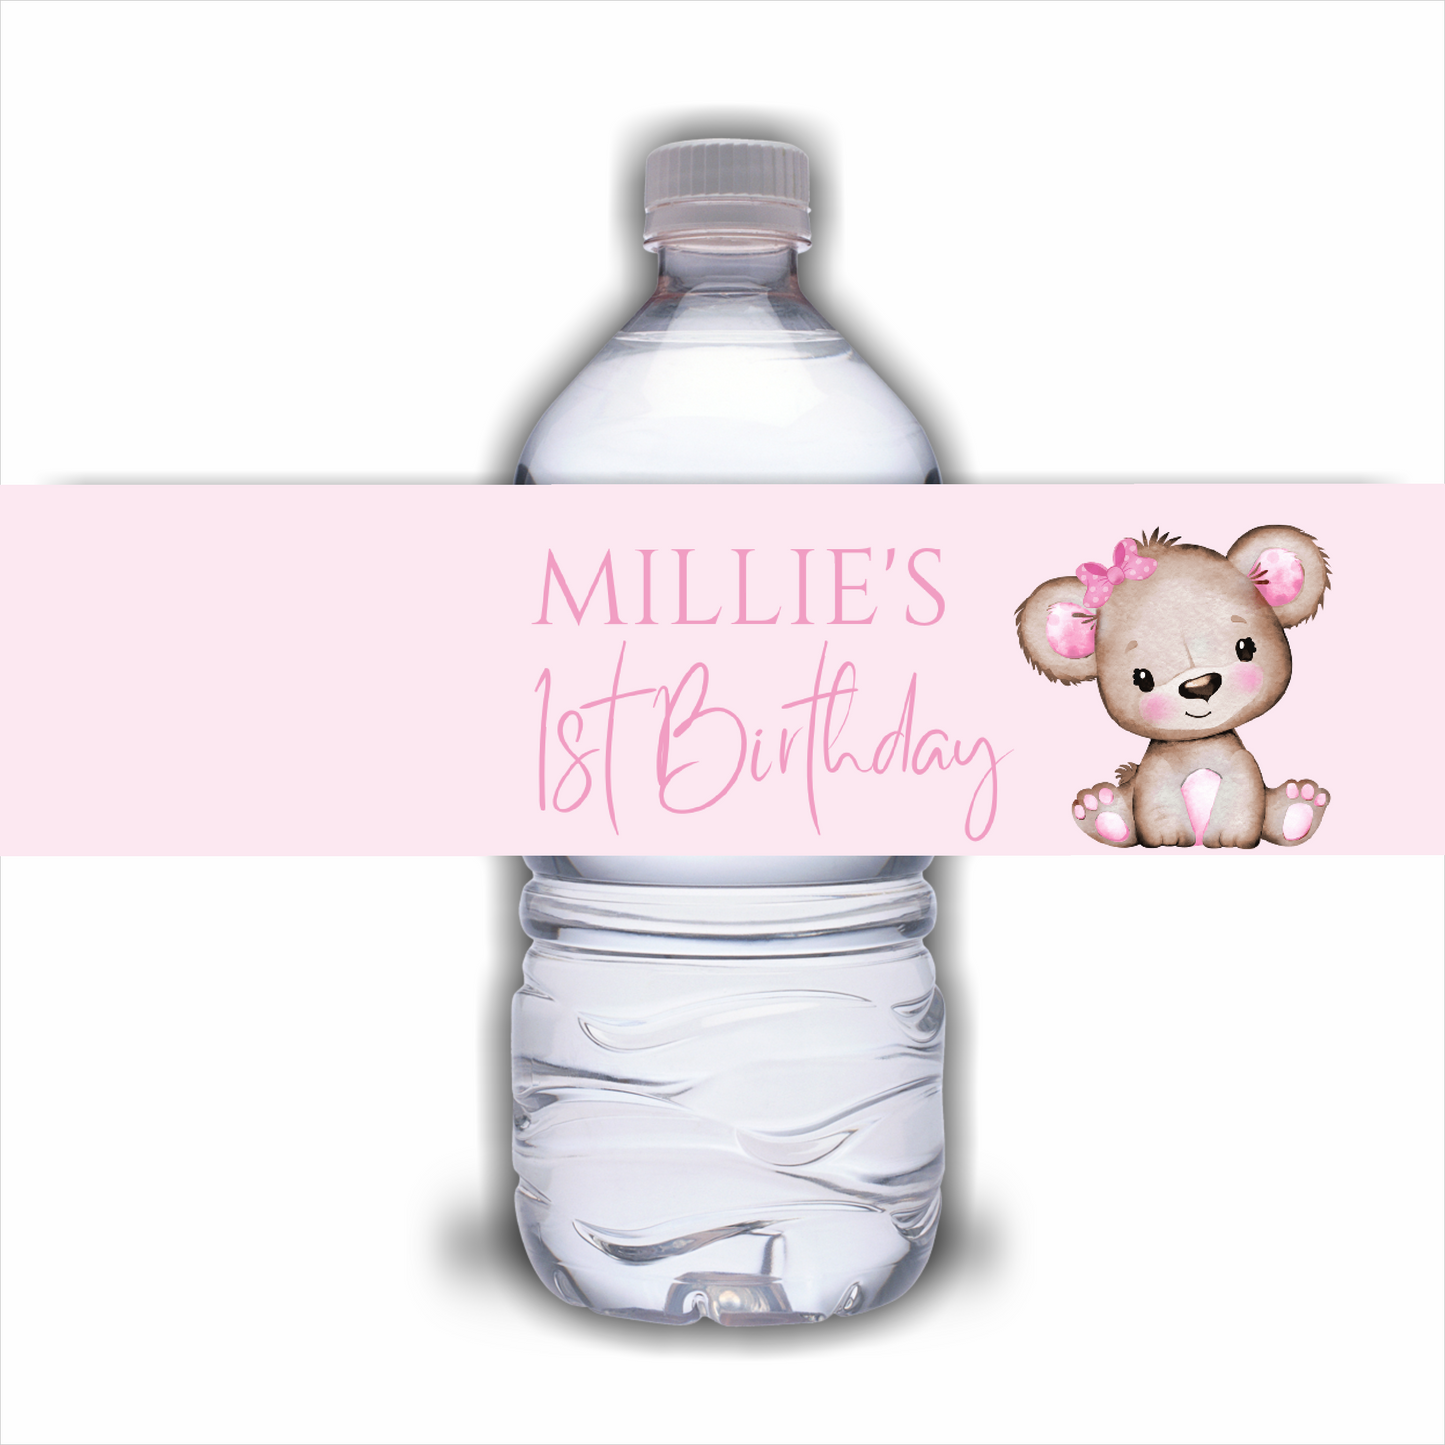 Juice Bottle Labels | Pink Or White Teddy Bear Labels | Water Bottle Stickers | Teddy Bear Baby Shower, Birthday Party